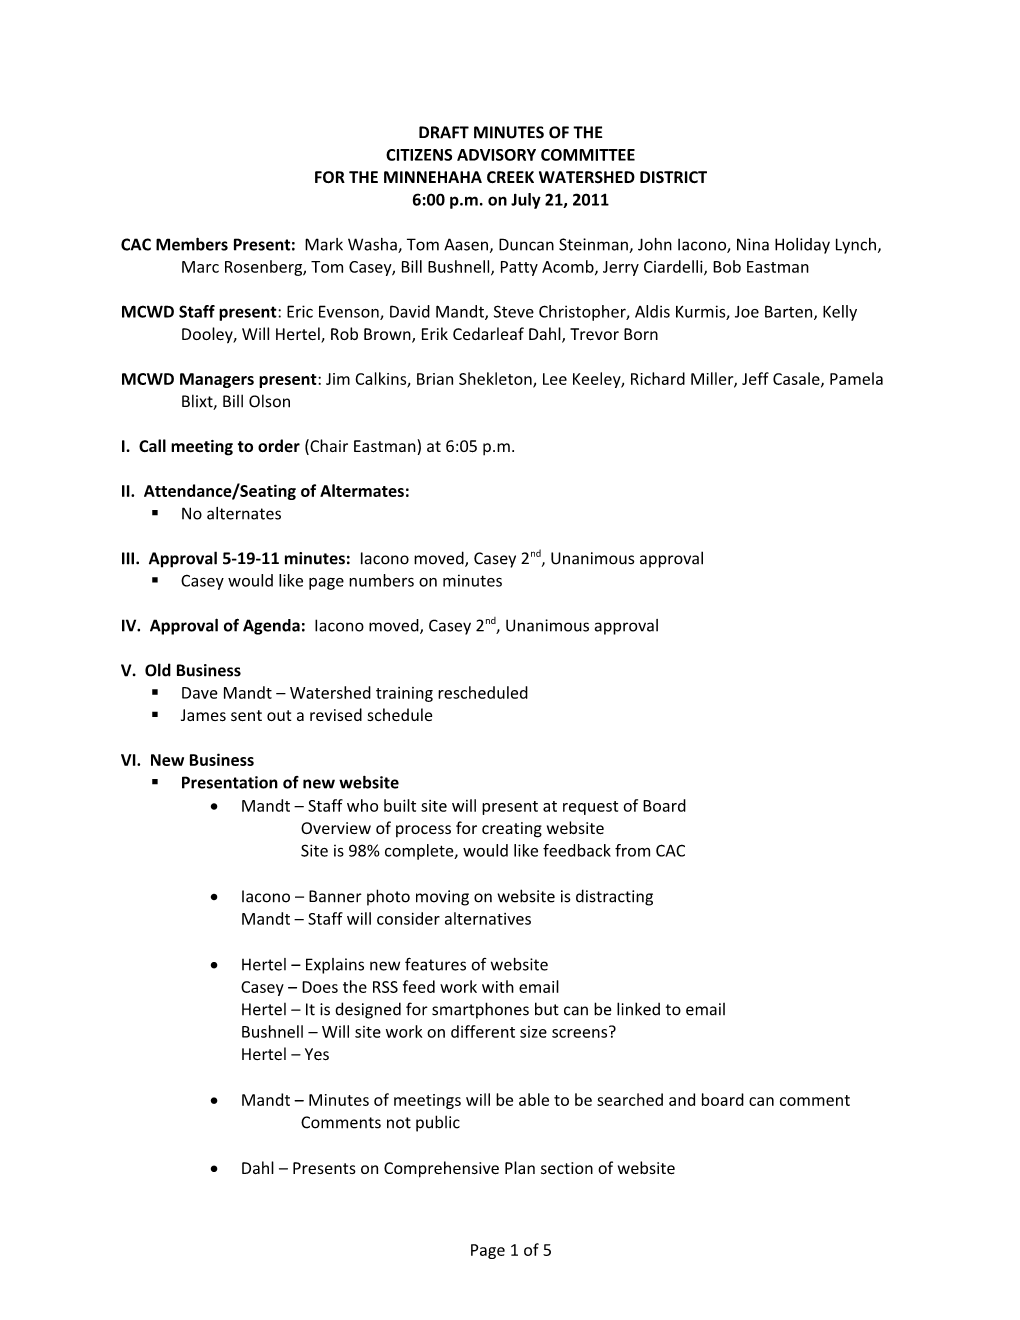 Draft Minutes of the Citizens Advisory Committee for the Minnehaha Creek Watershed District